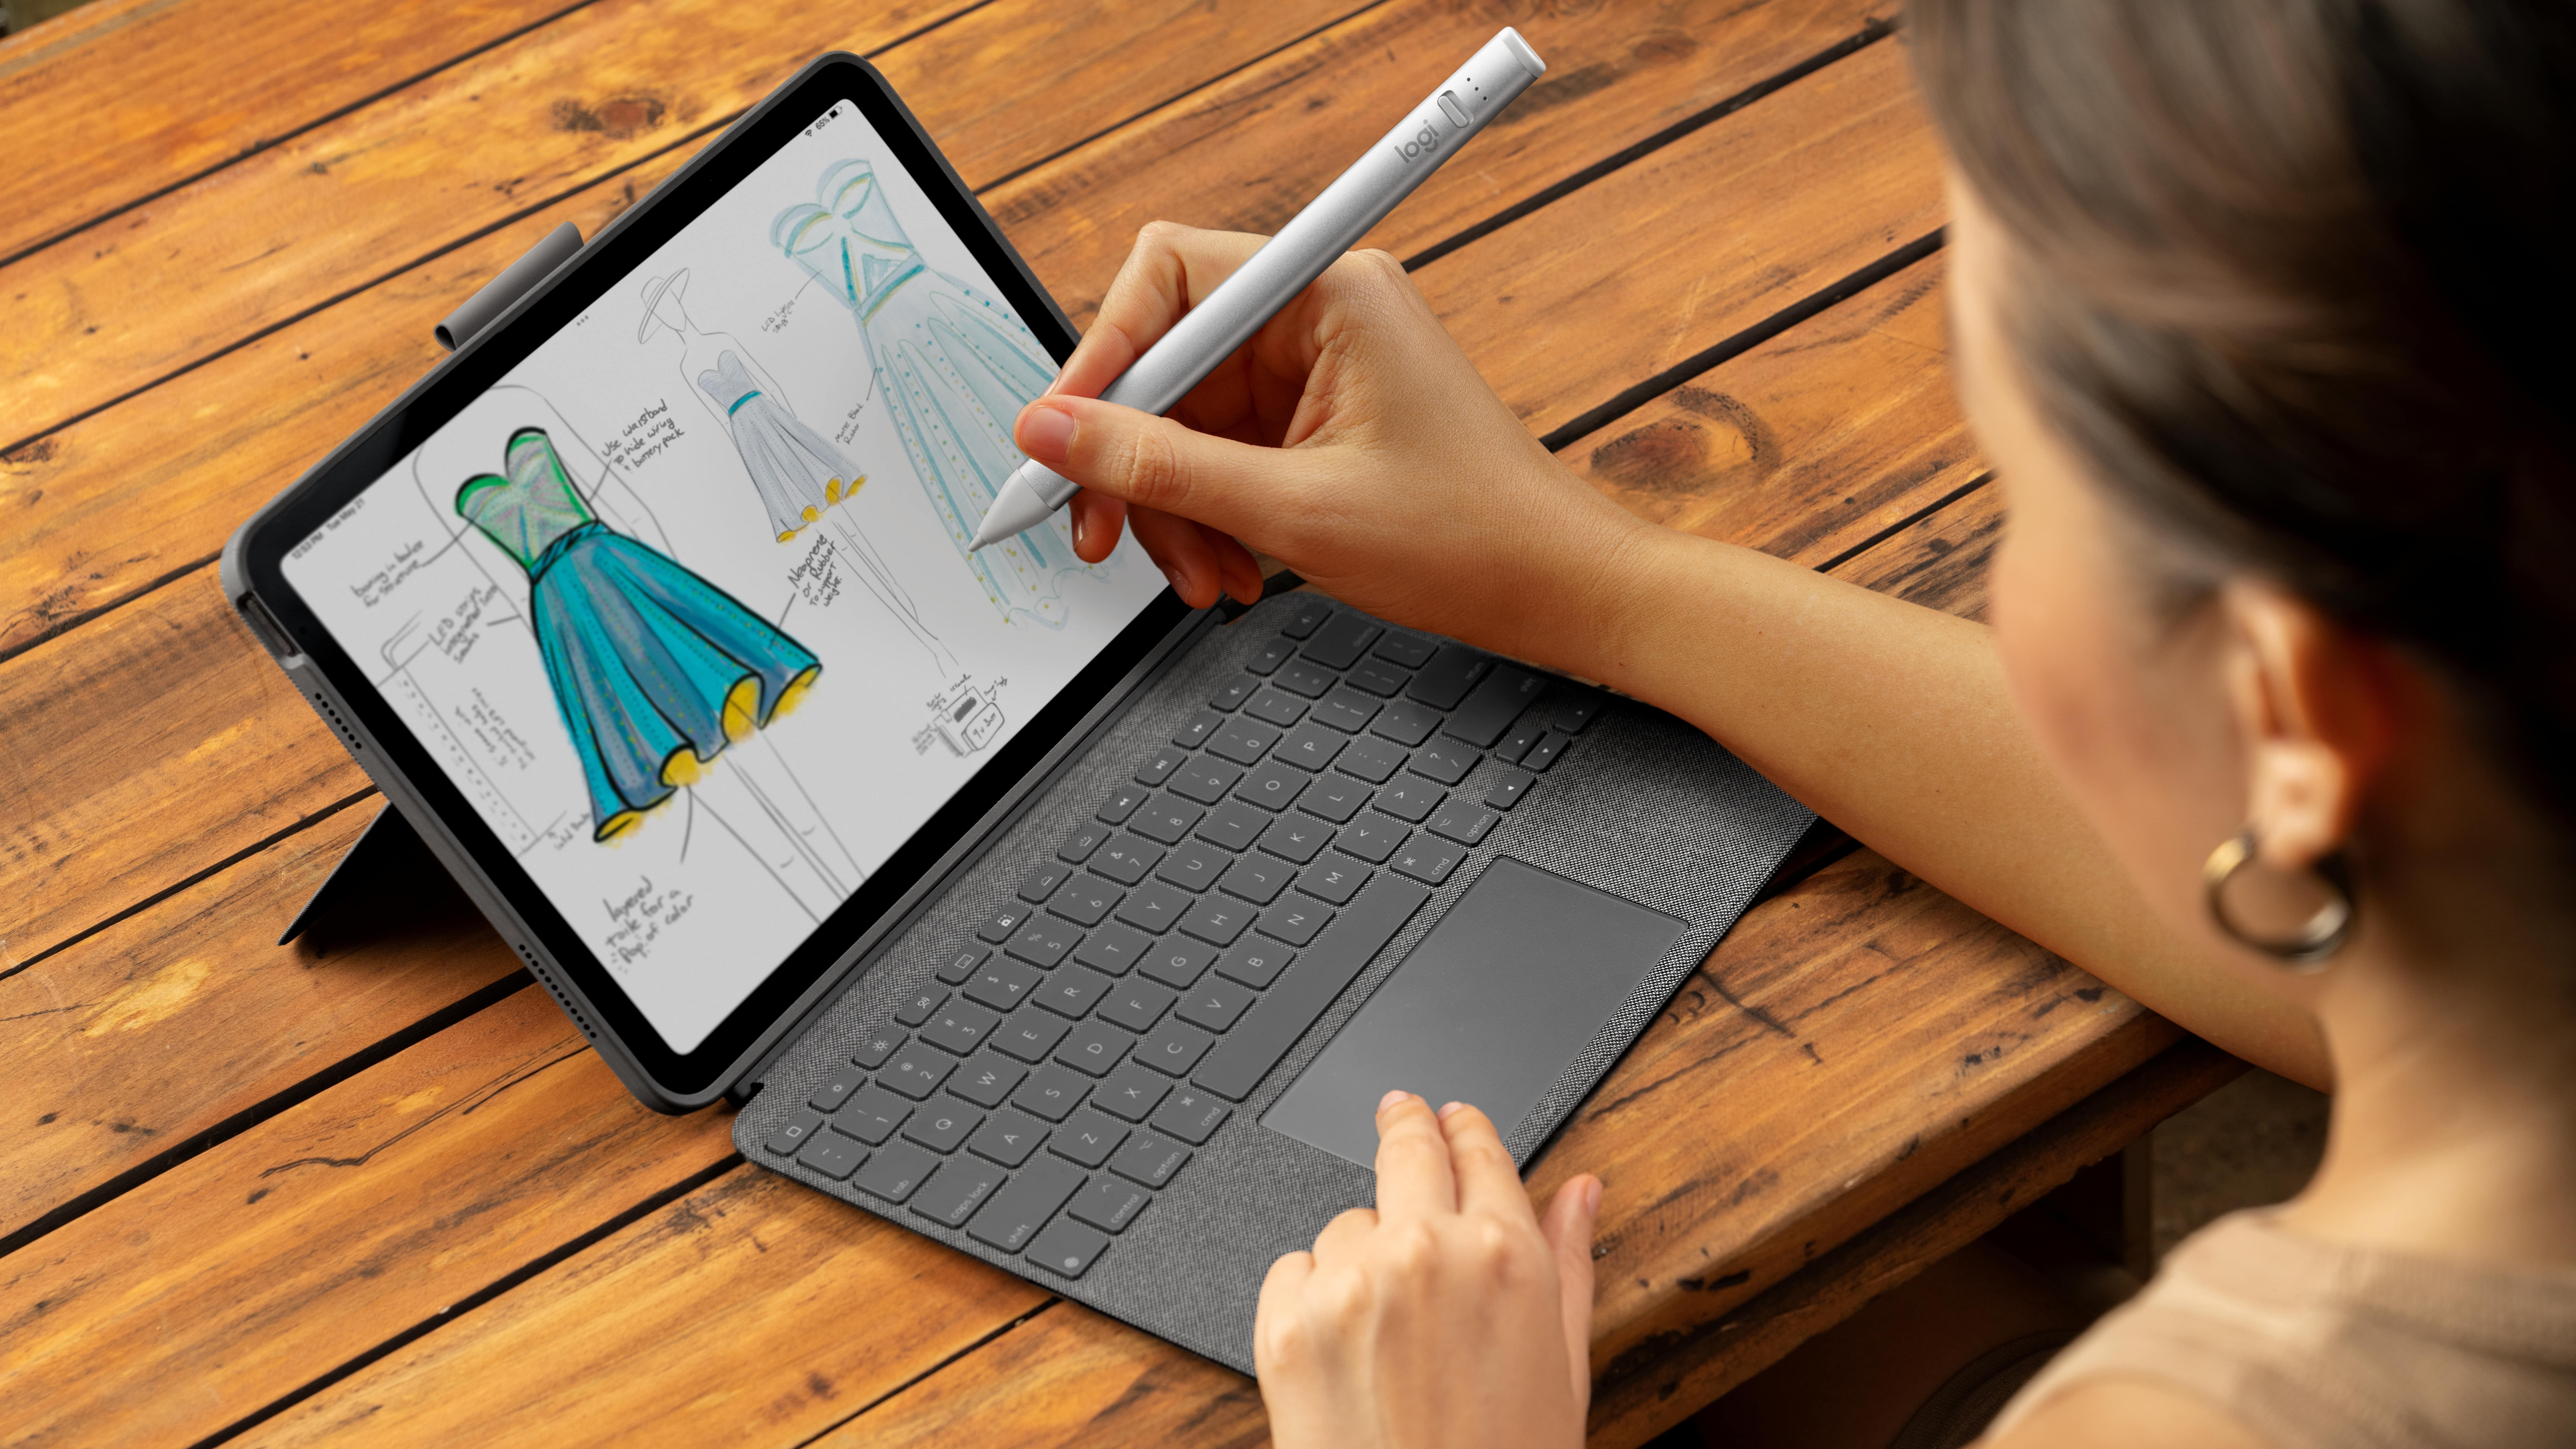 The Logitech Combo Touch Keyboard Case with Trackpad and Logitech Crayon being used on an iPad by a dress designer.